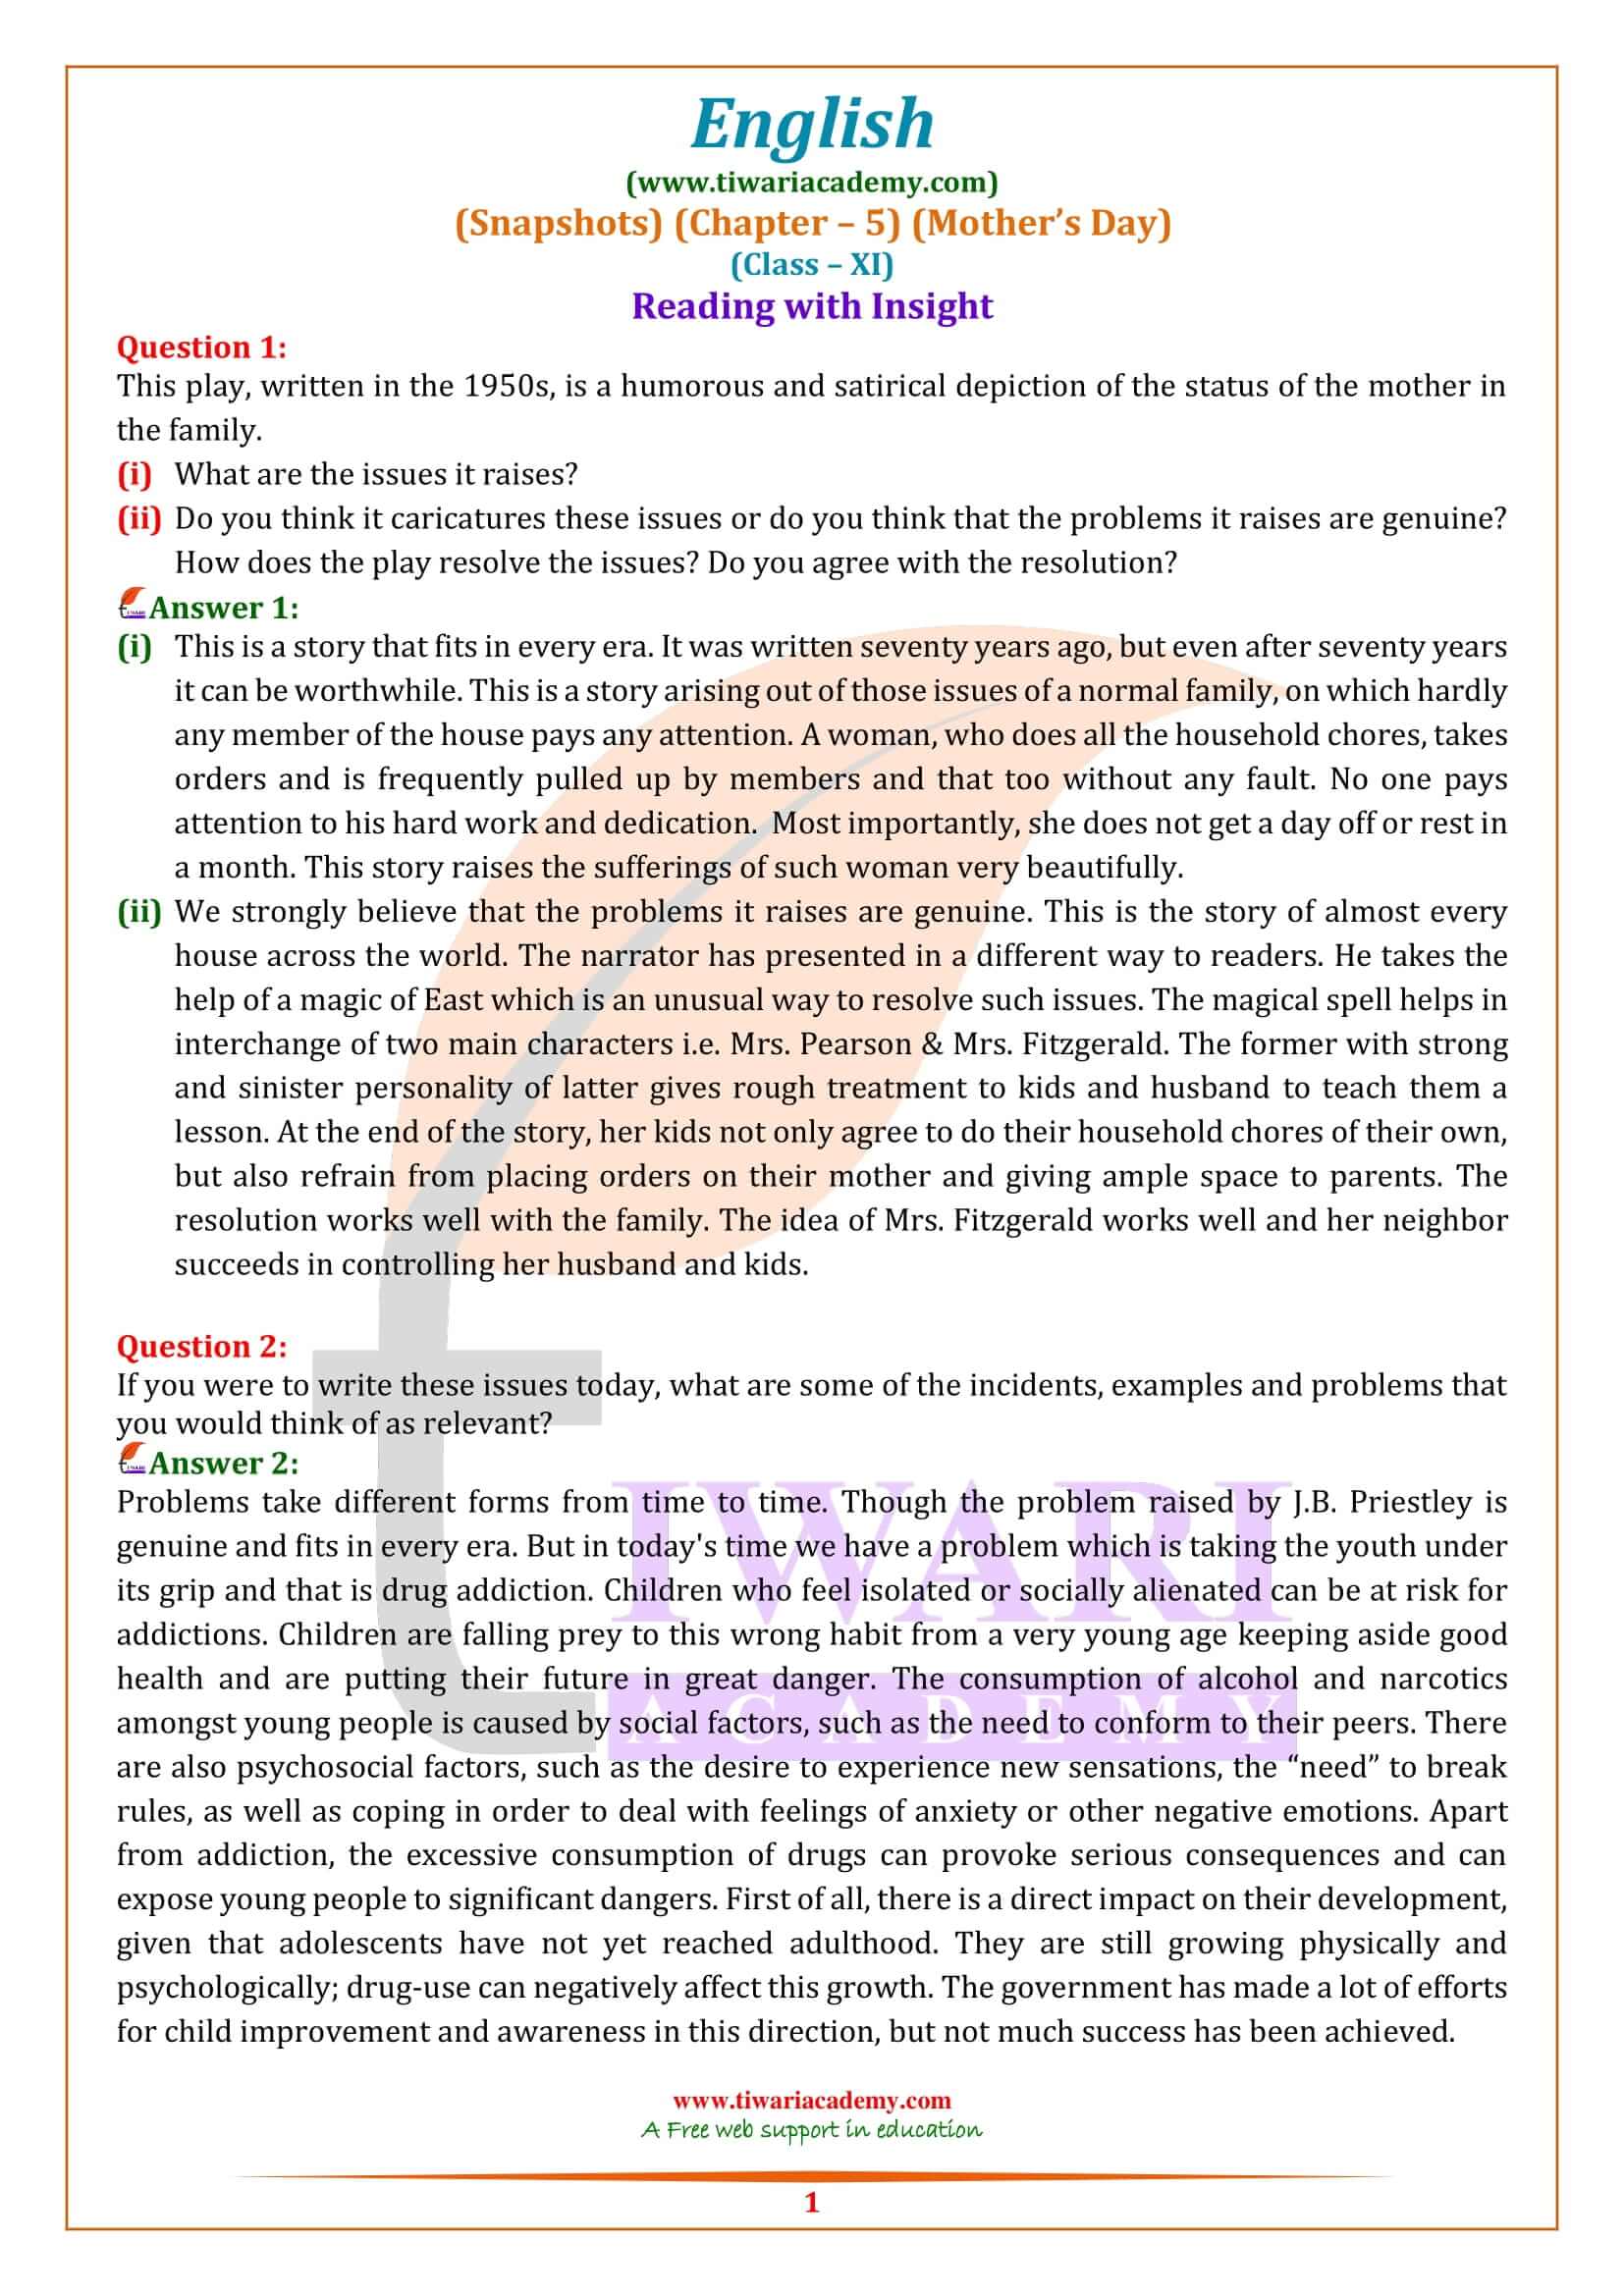 NCERT Solutions for Class 11 English Snapshots Chapter 5